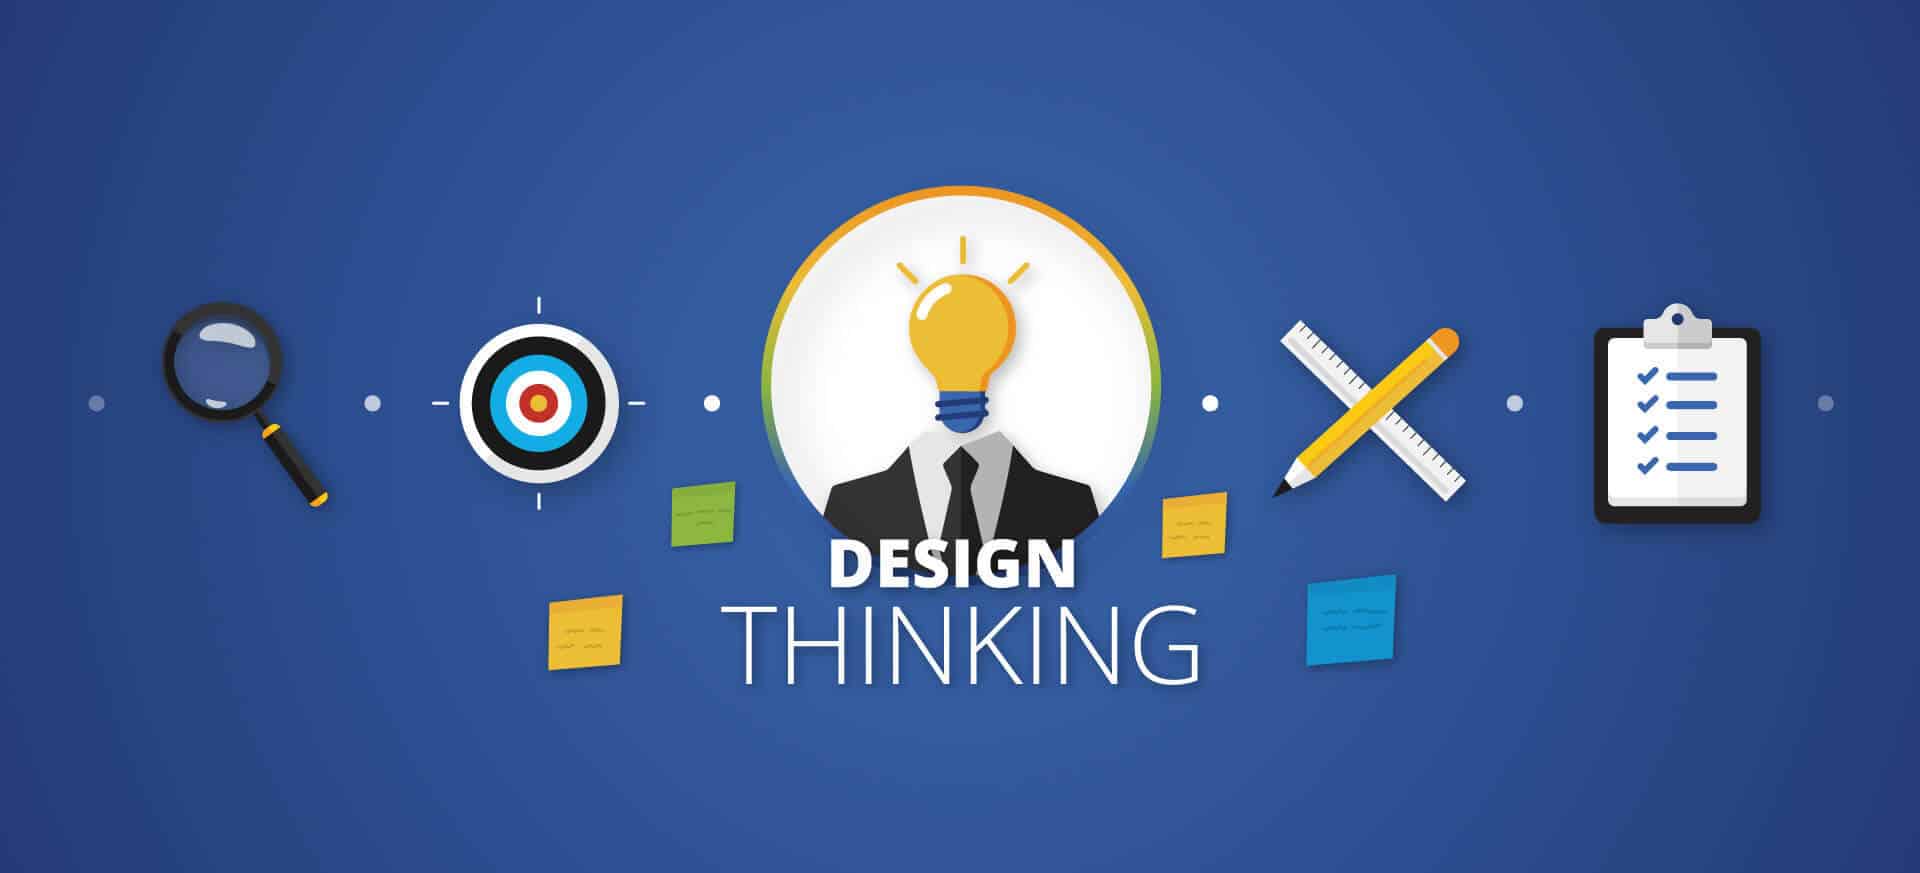 Design Thinking: Practical Applications and Why it’s Not Just for Designers